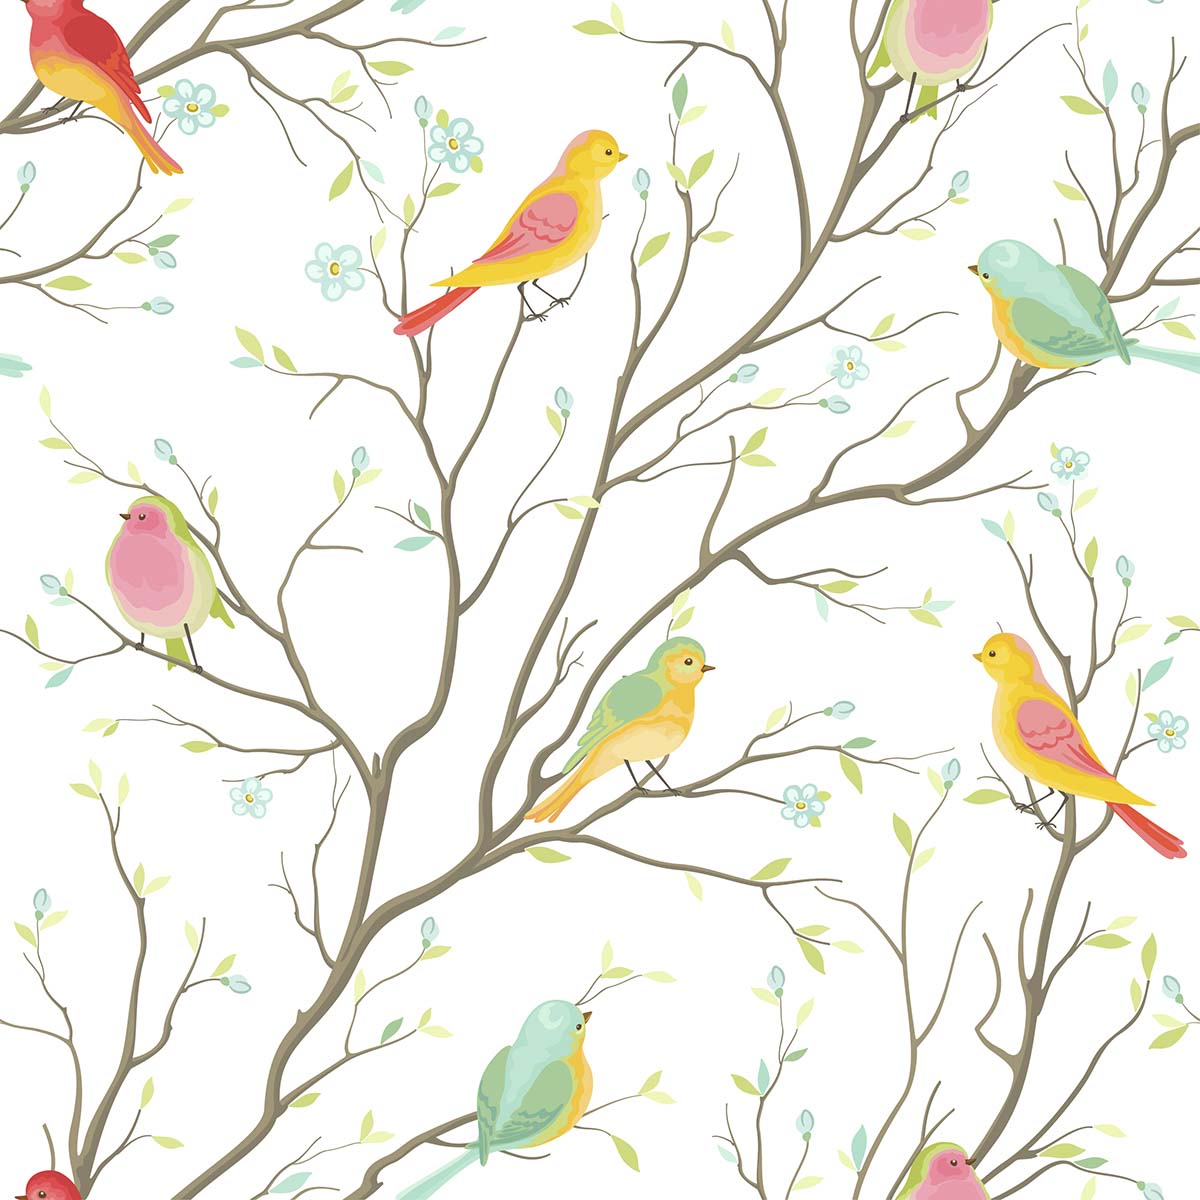 A pattern of colorful birds on a tree branch